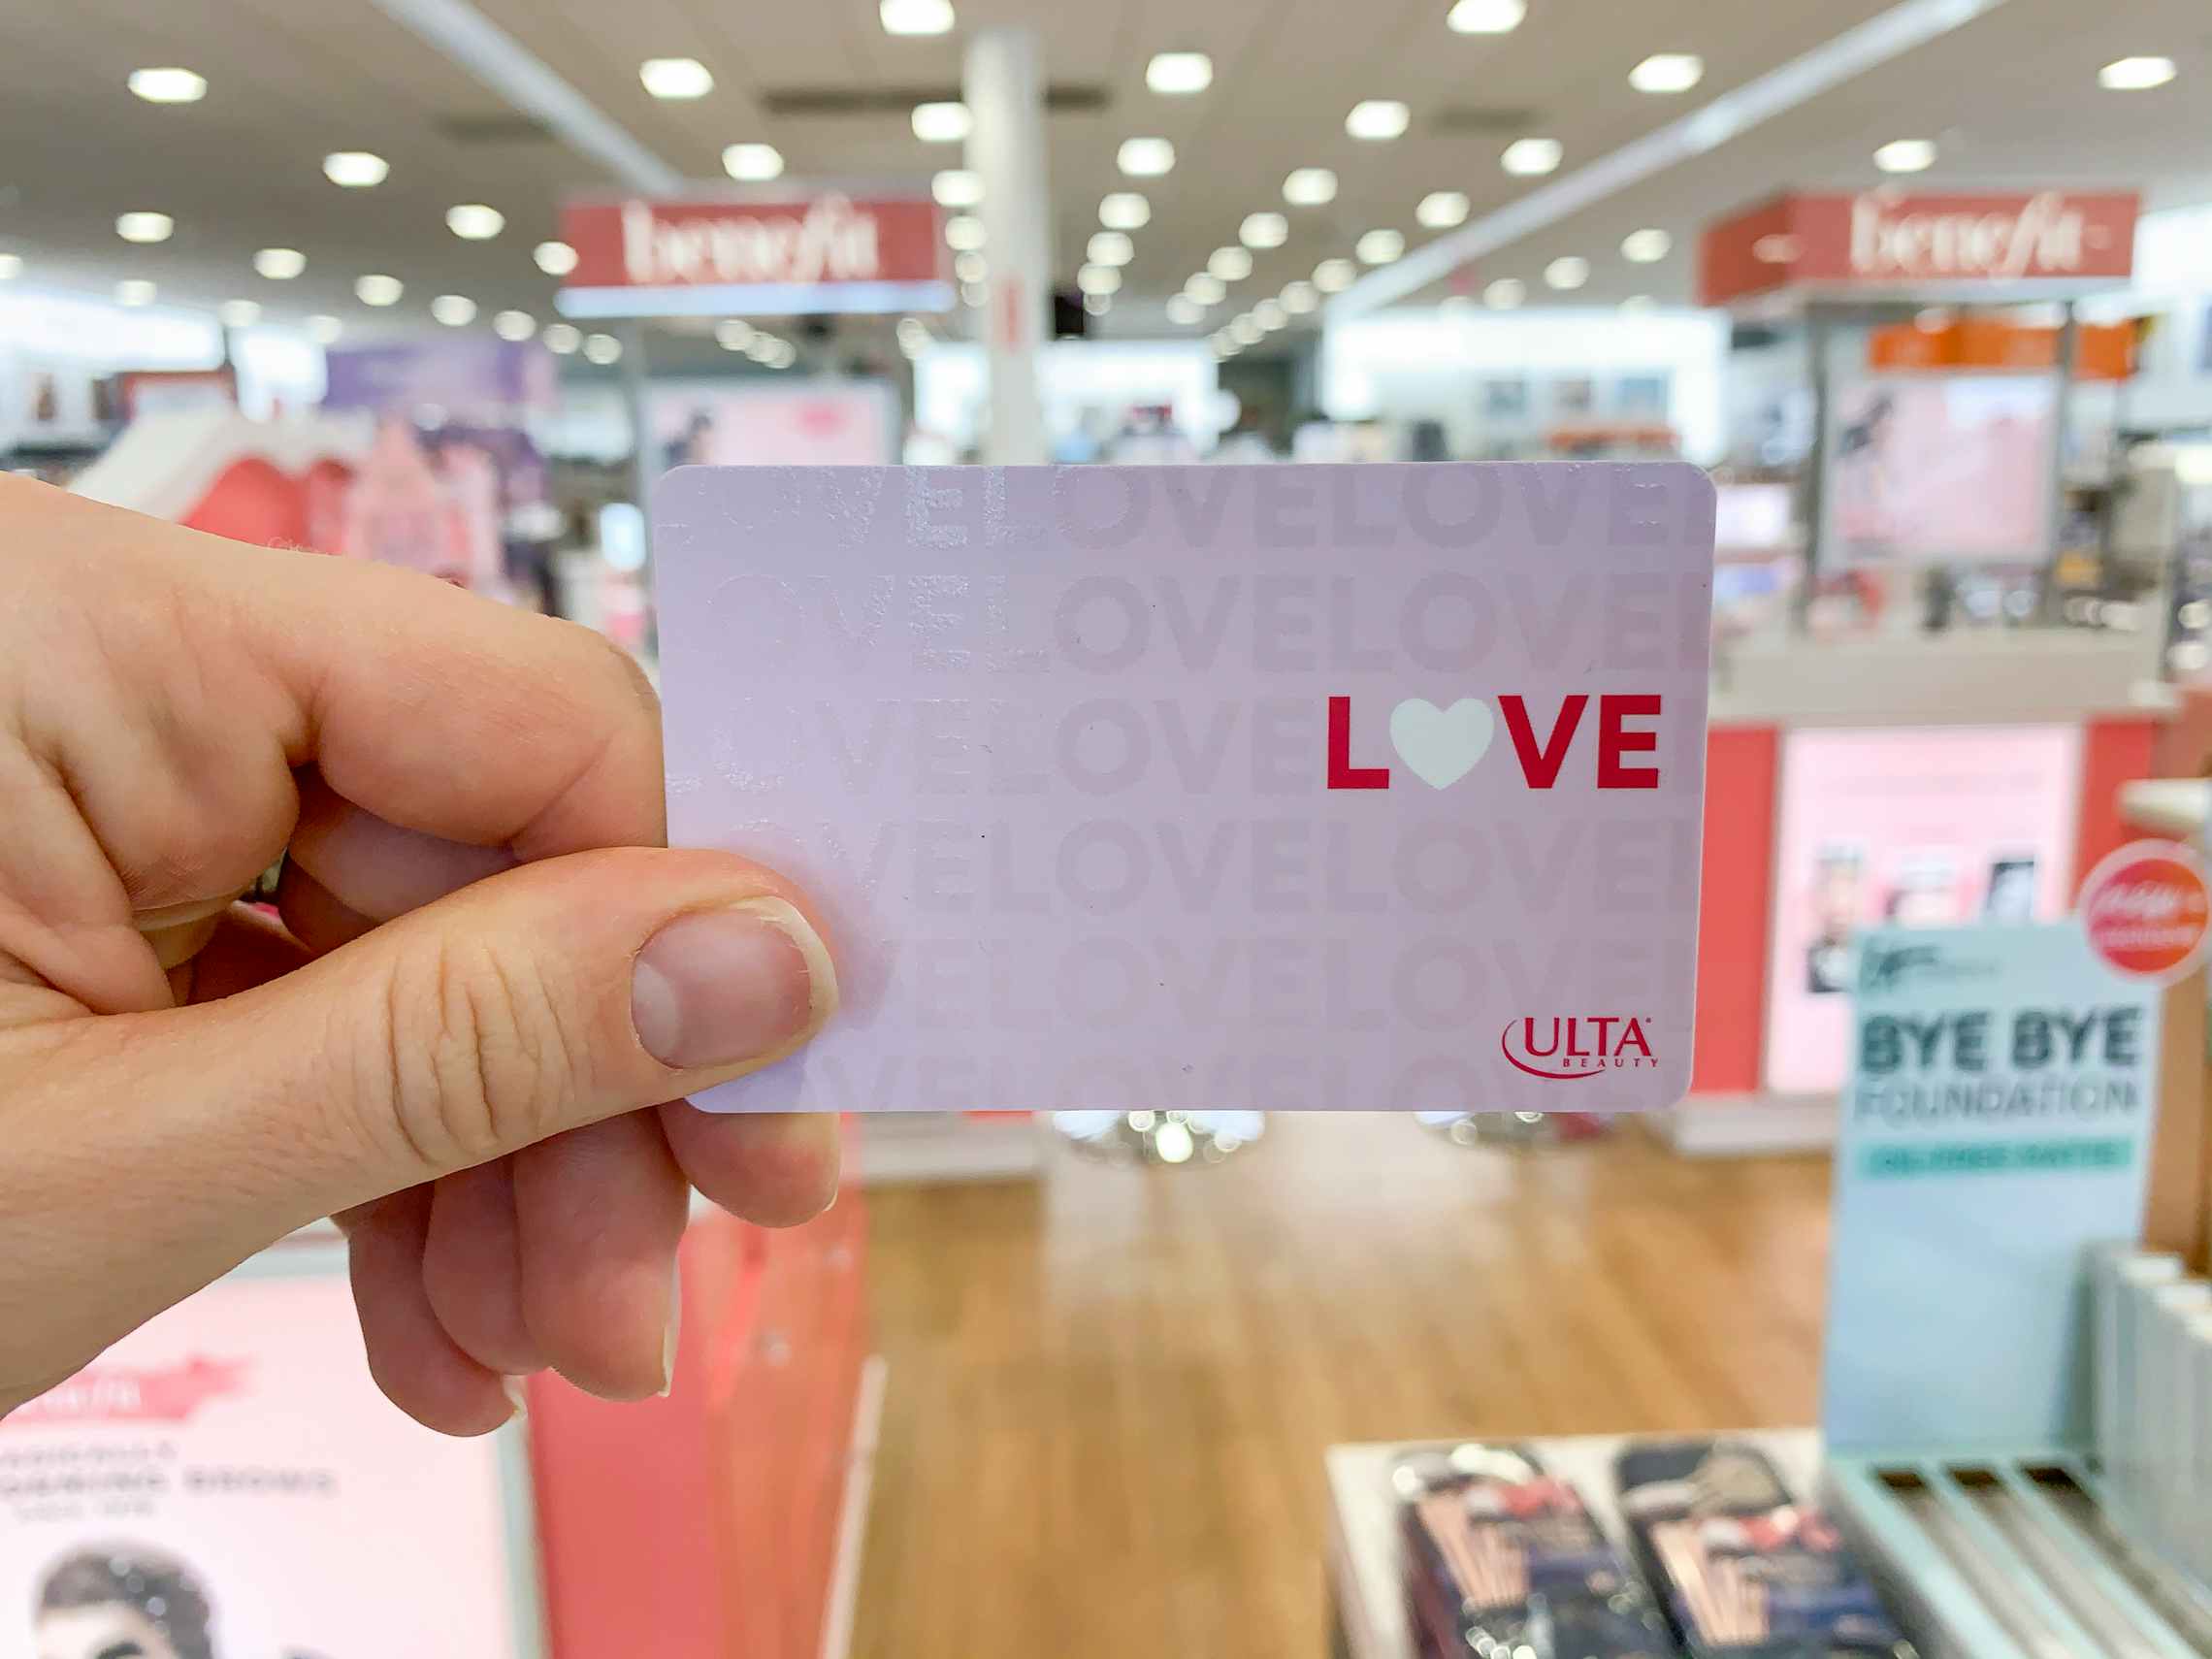 An ulta gift card with the word "Love" on the front held in a store.